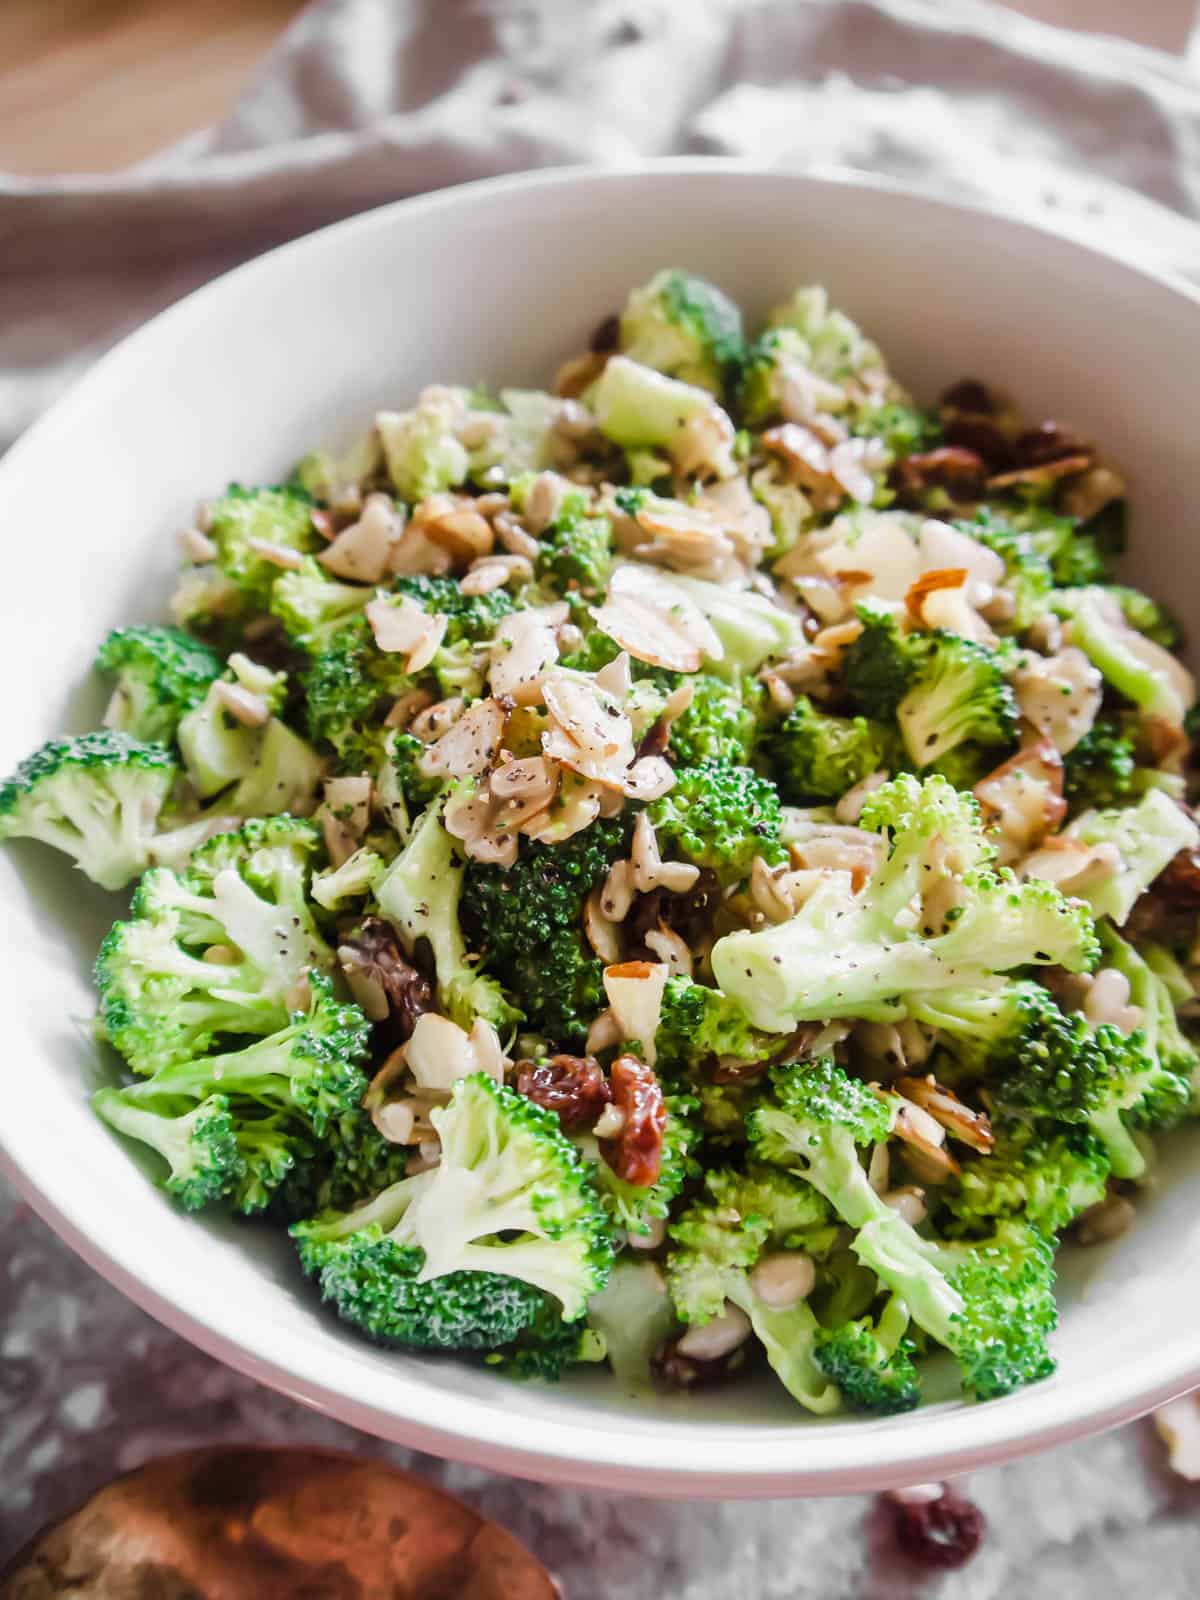 Broccoli salad without bacon in a large bowl.